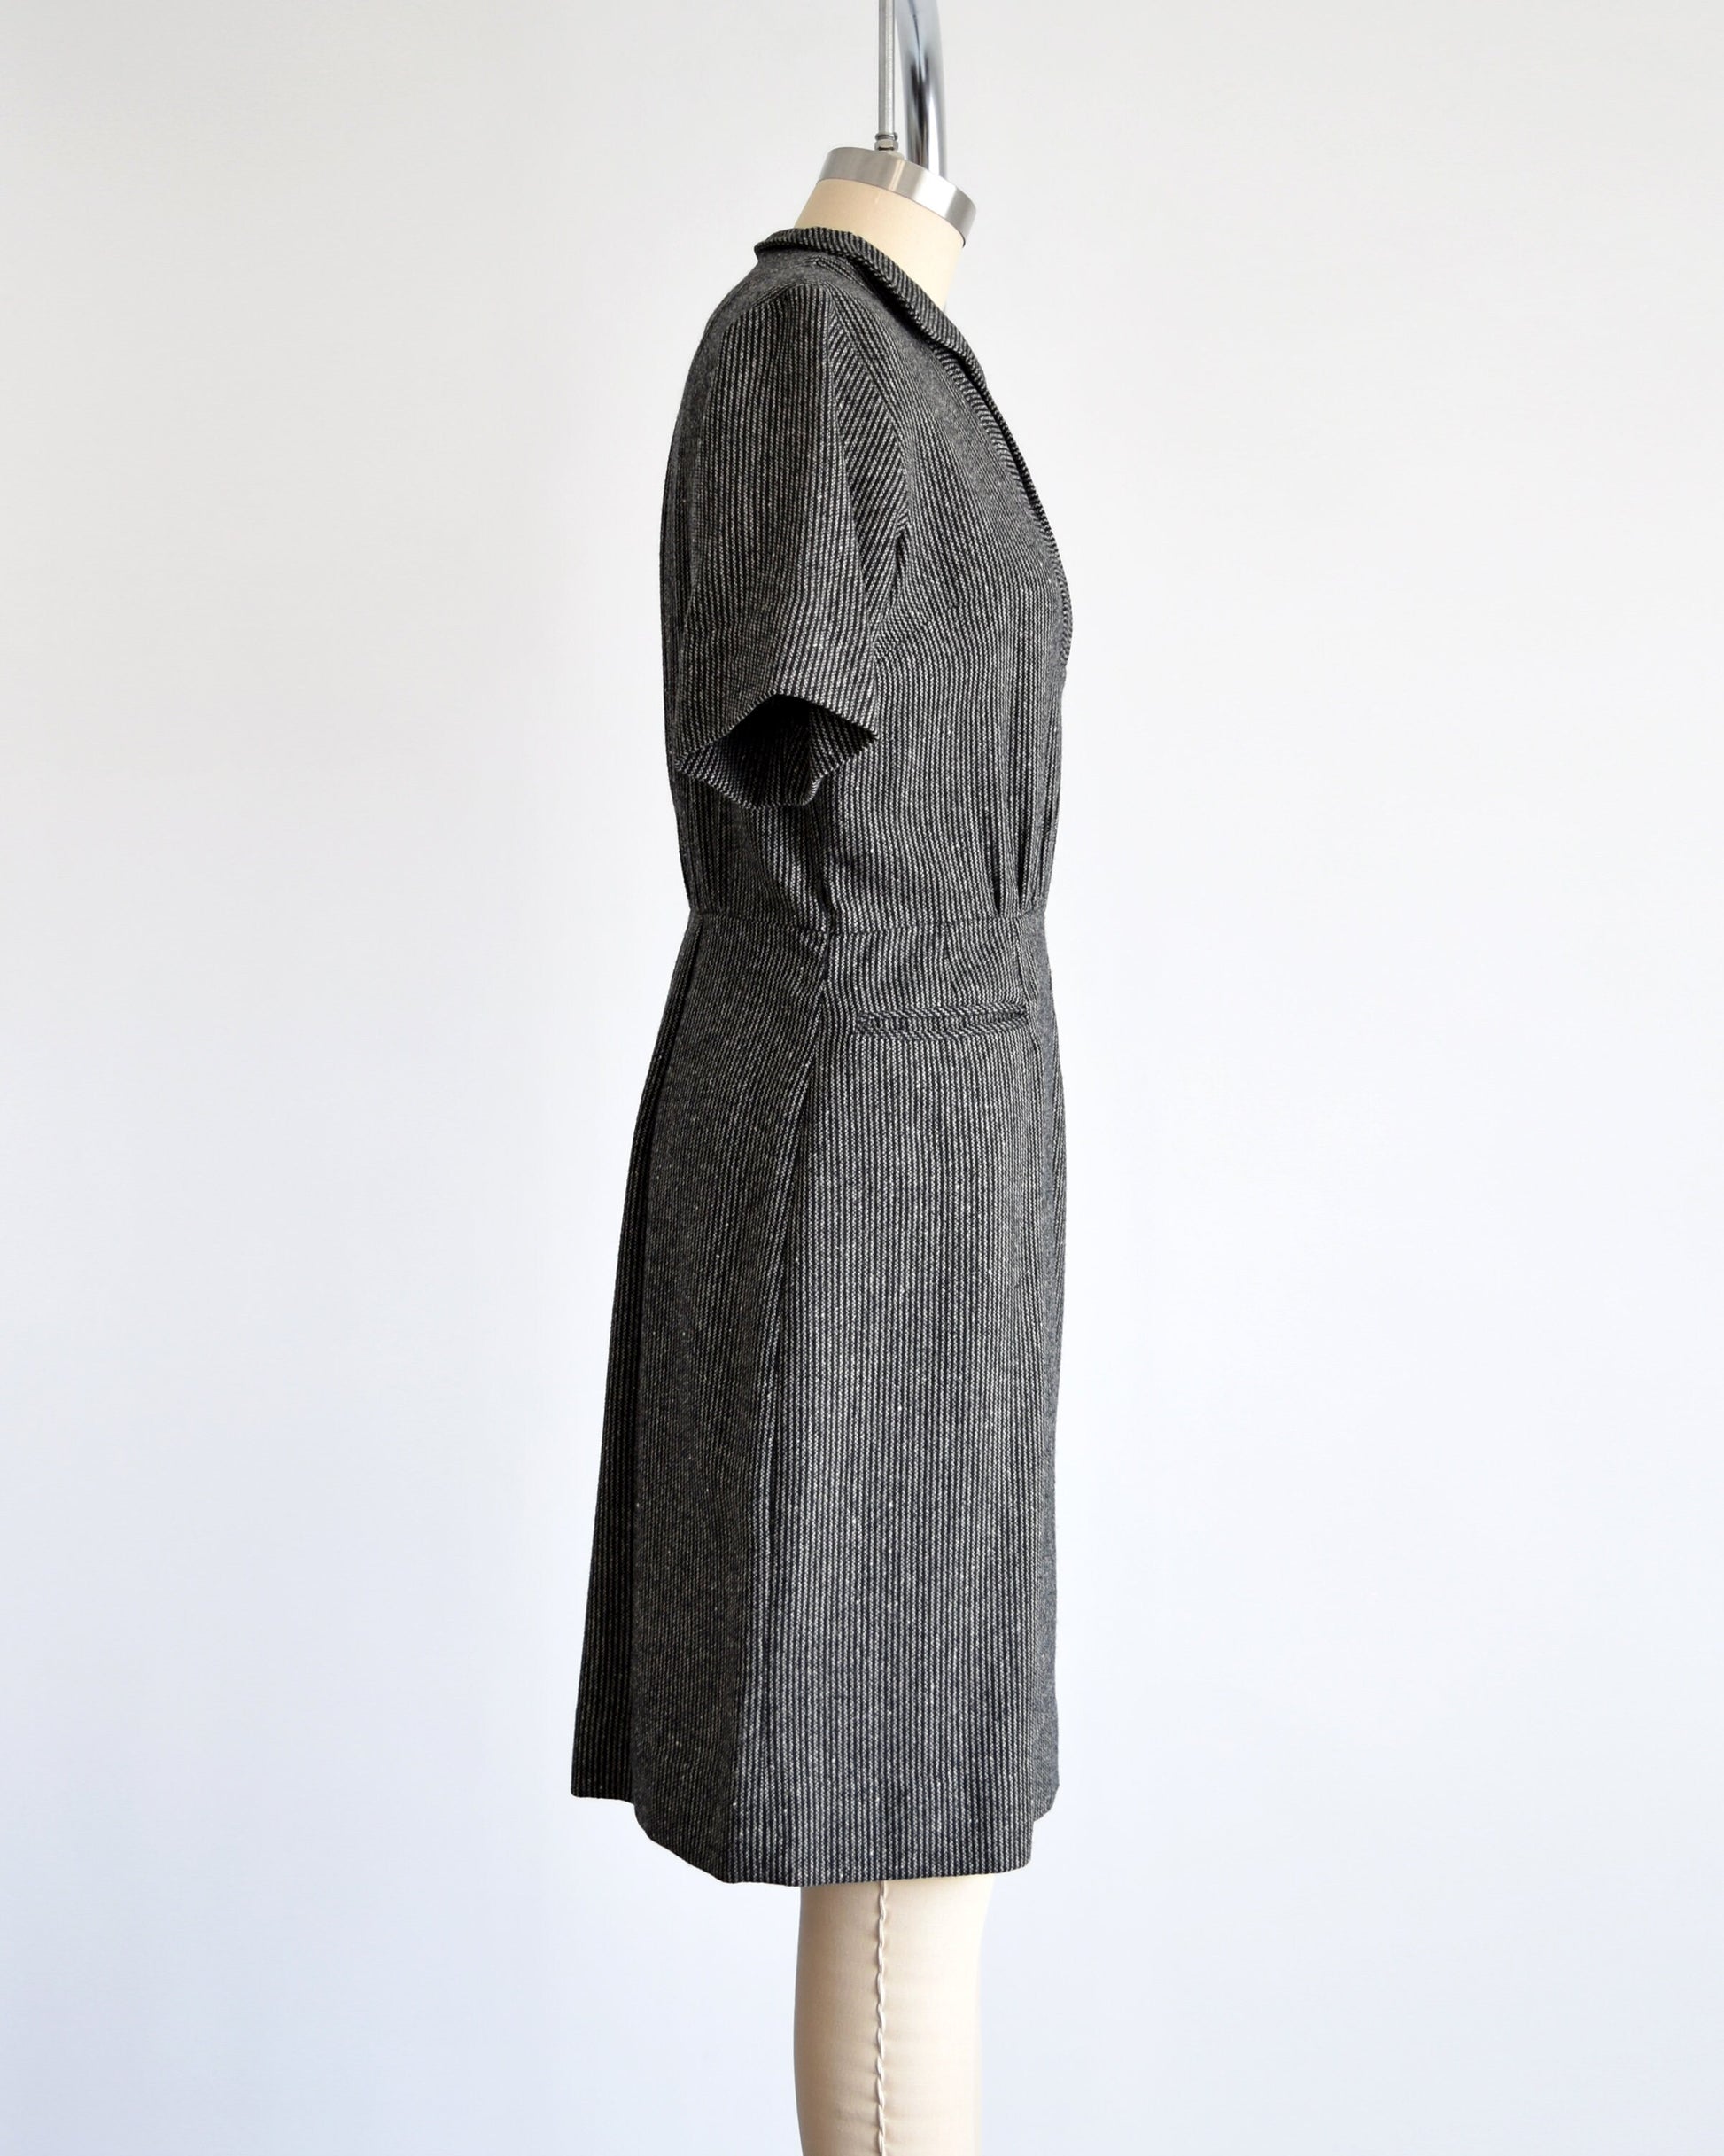 Side view of a 1950s vintage wool dress that is black and white striped with a v-neck collared neckline, short sleeves, fitted waist, and two front pockets below the waist. Dress is on a dress form